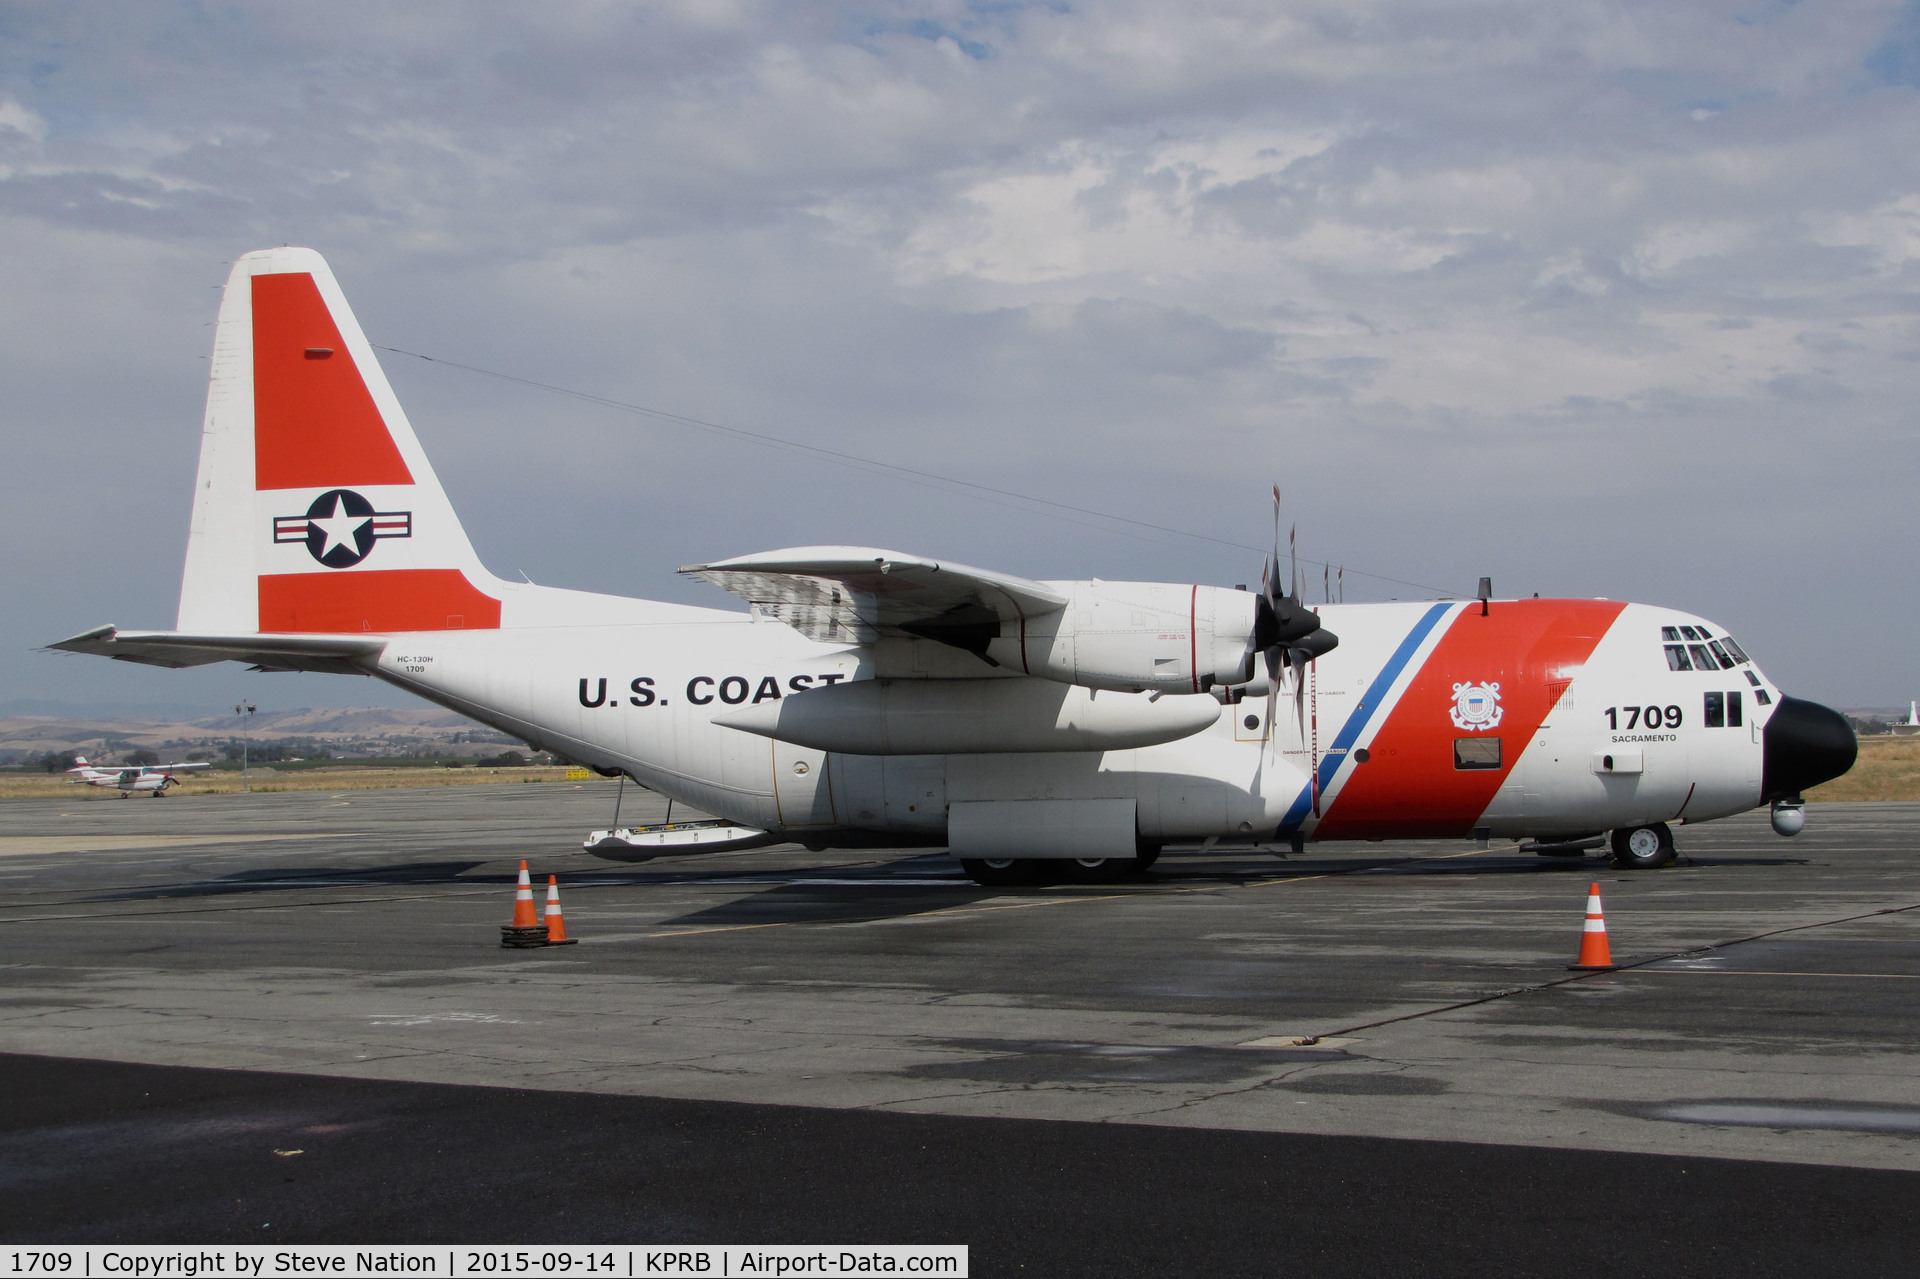 1709, 1983 Lockheed HC-130H Hercules C/N 382-5005, US Coast Guard Sacramento, CA-Based HC-130H @ Paso Robles Municipal Airport, CA prior to paradrop mission over nearby Hunter-Liggett Military Reservation. This HC-130H is scheduled to be transferred to the US Forest Service.